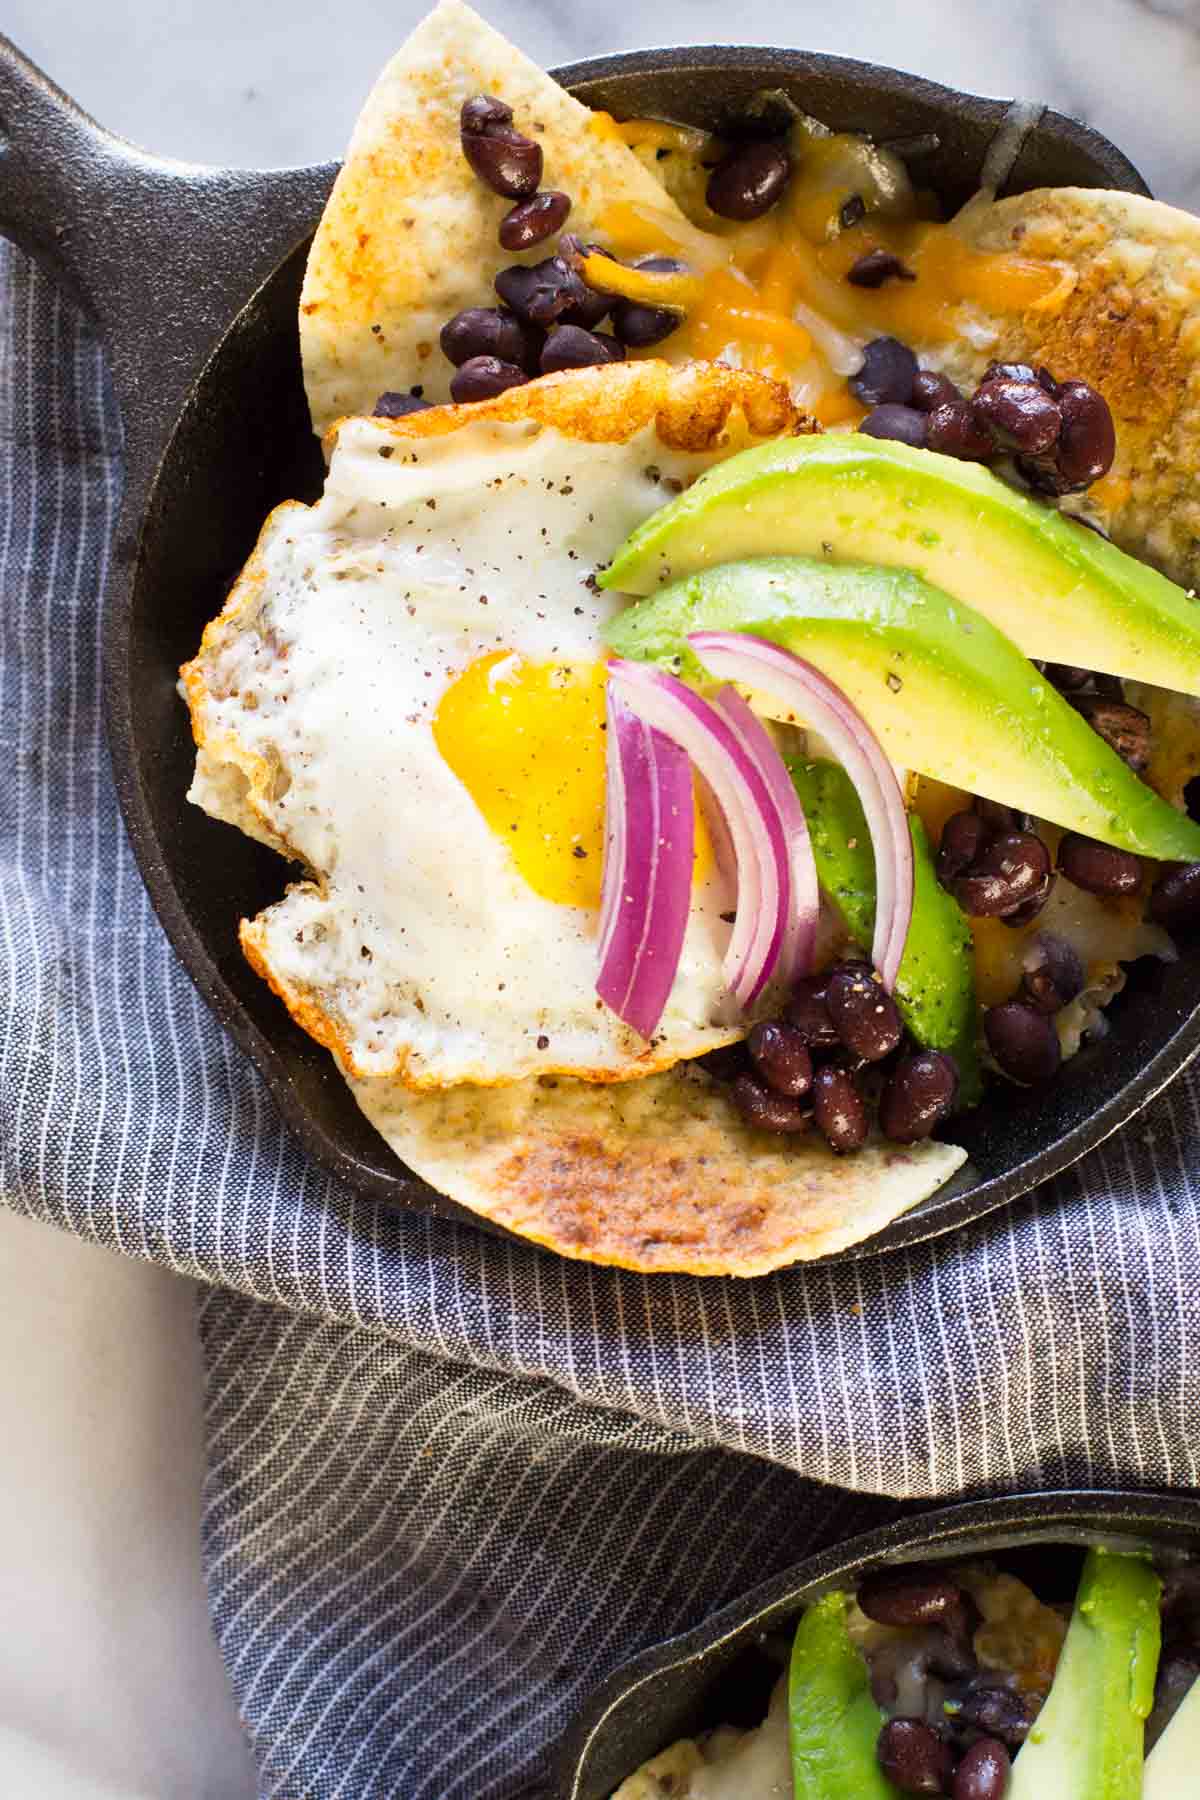 Breakfast Nacho Skillet topped with avocado slices and red onion.  